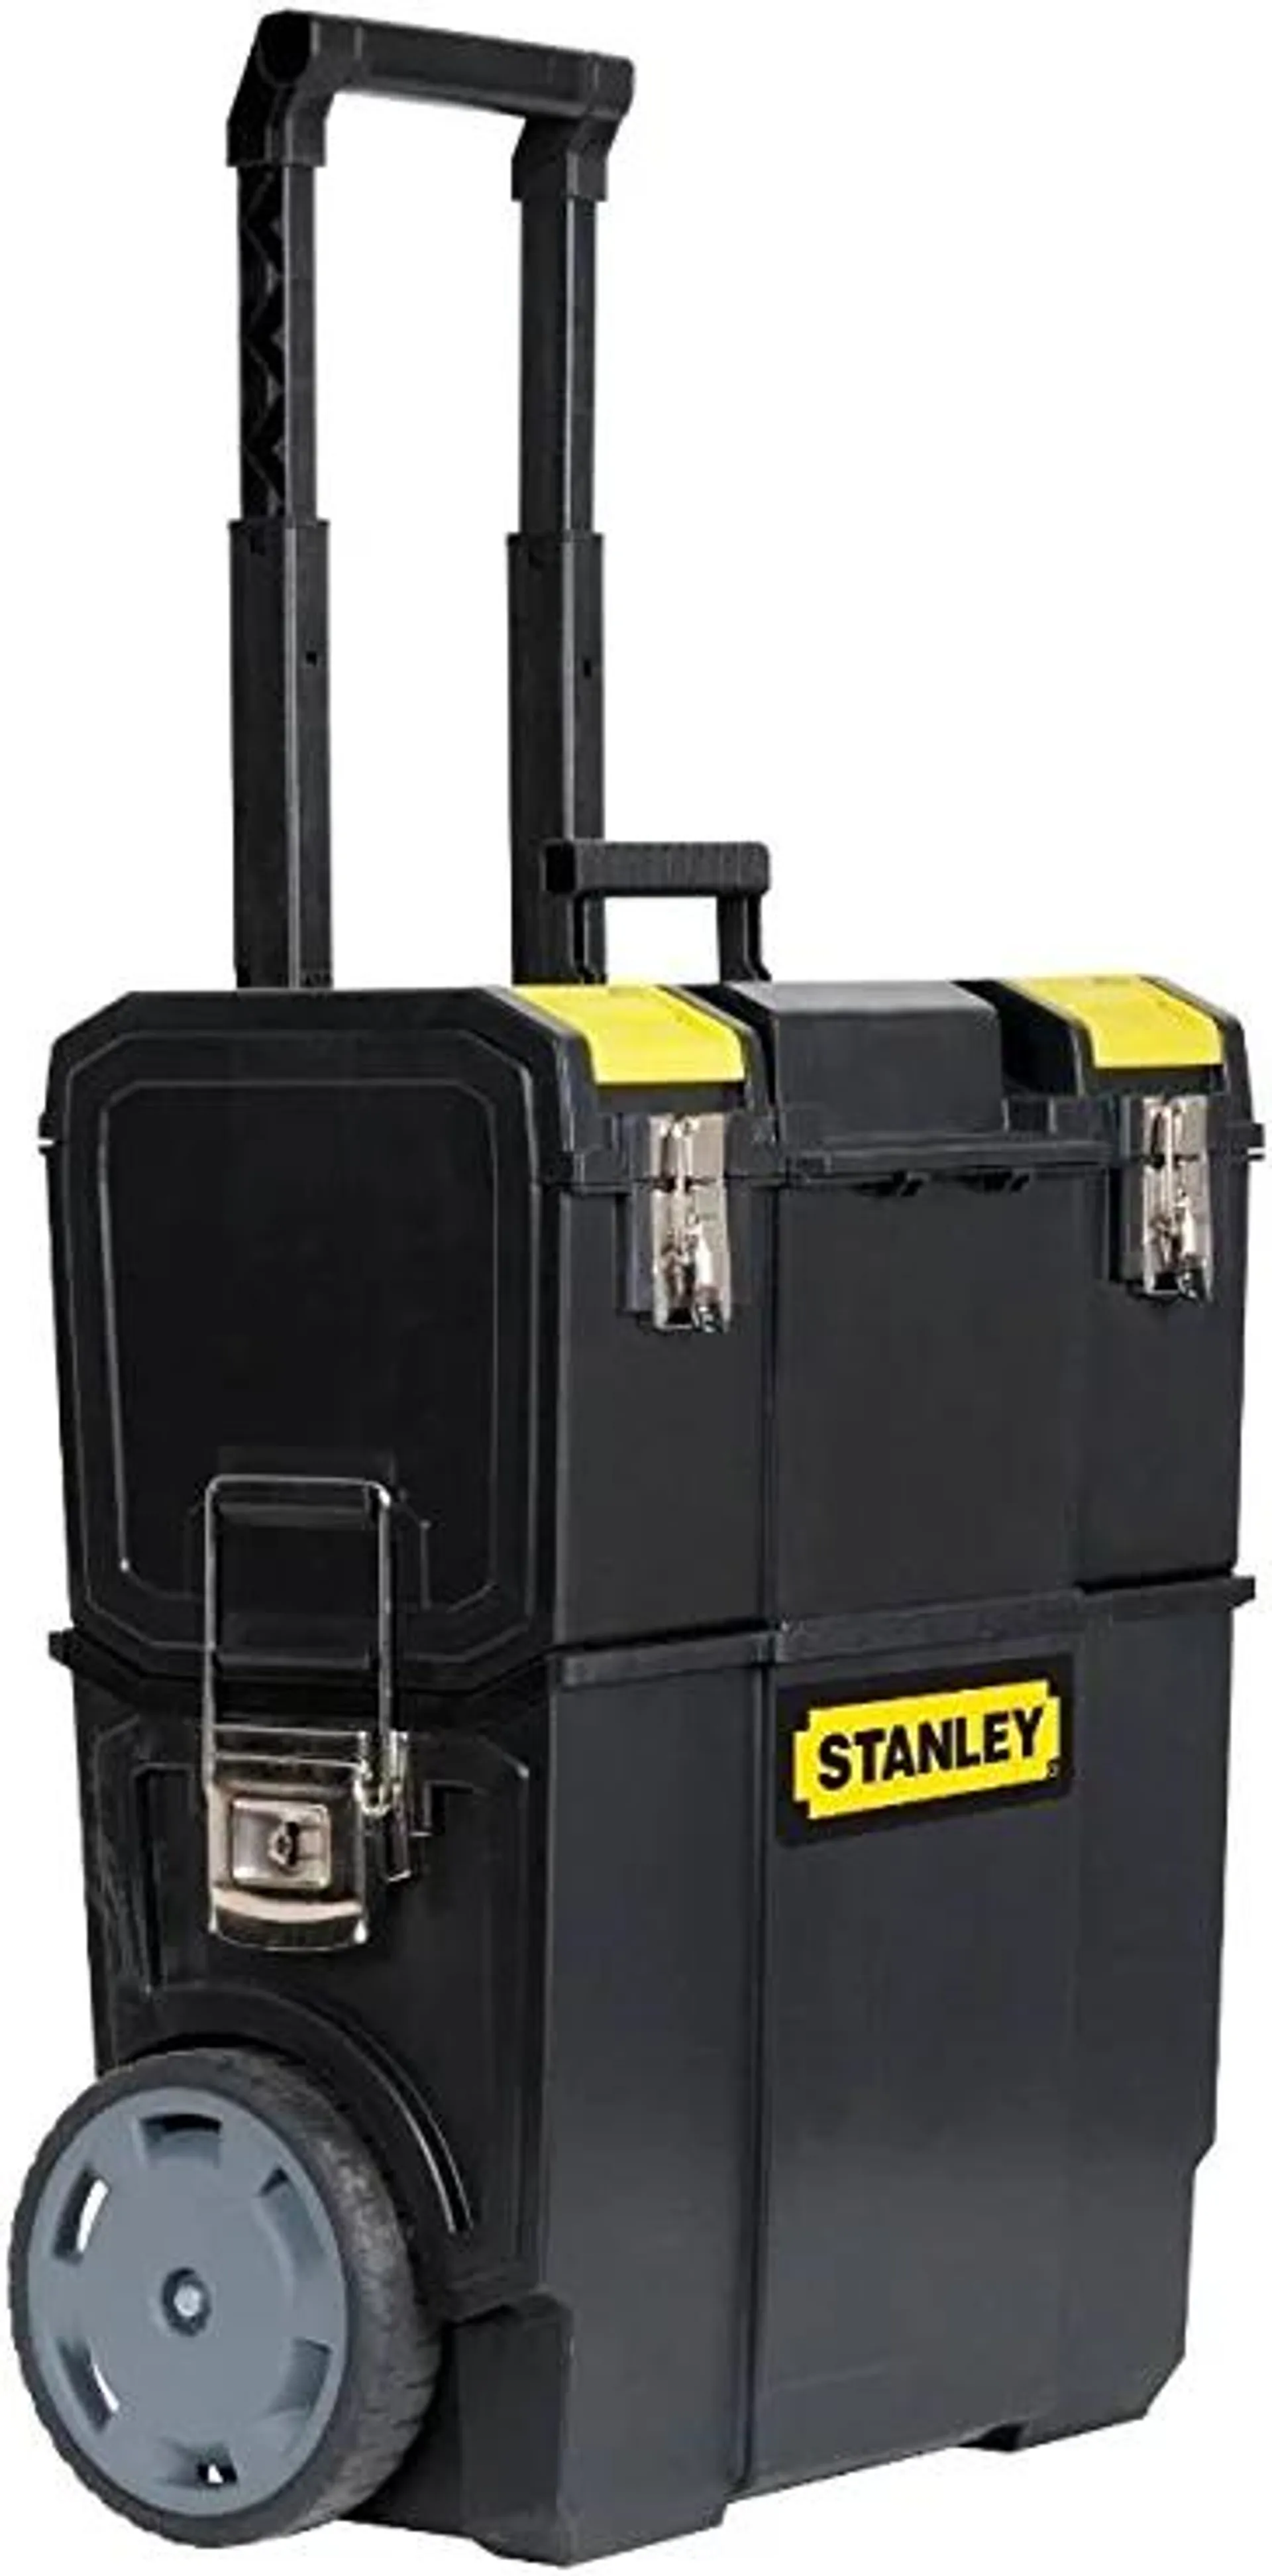 STANLEY 2 in 1 Rolling Toolbox with Pull Handle, Detachable Toolbox, Portable Tote Tray for Tools and Small Parts, 1-70-327